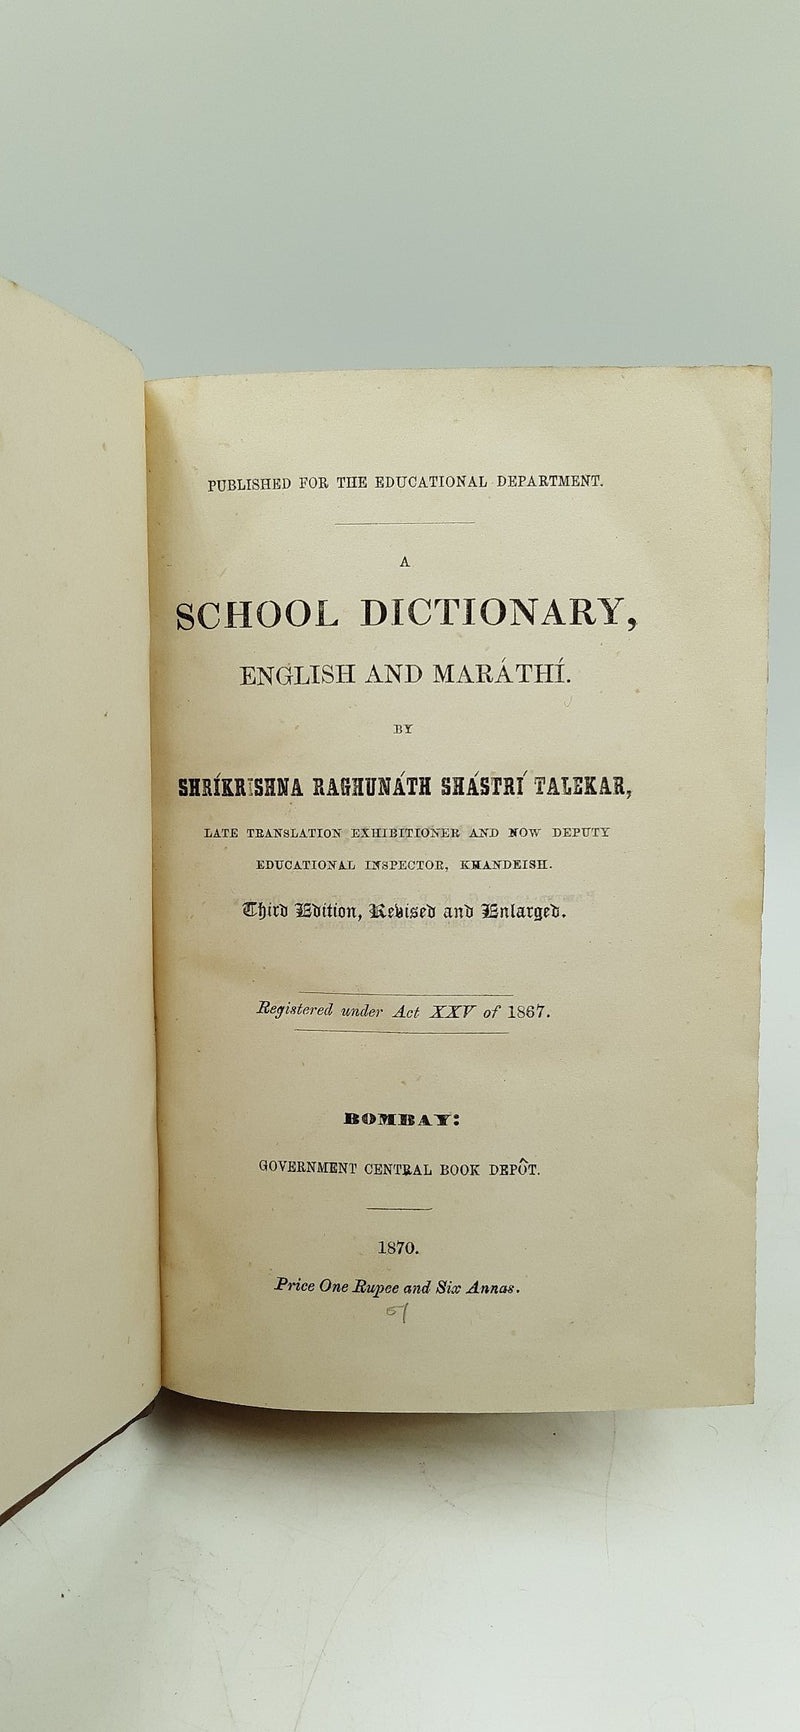 A School Dictionary, English and Marathi